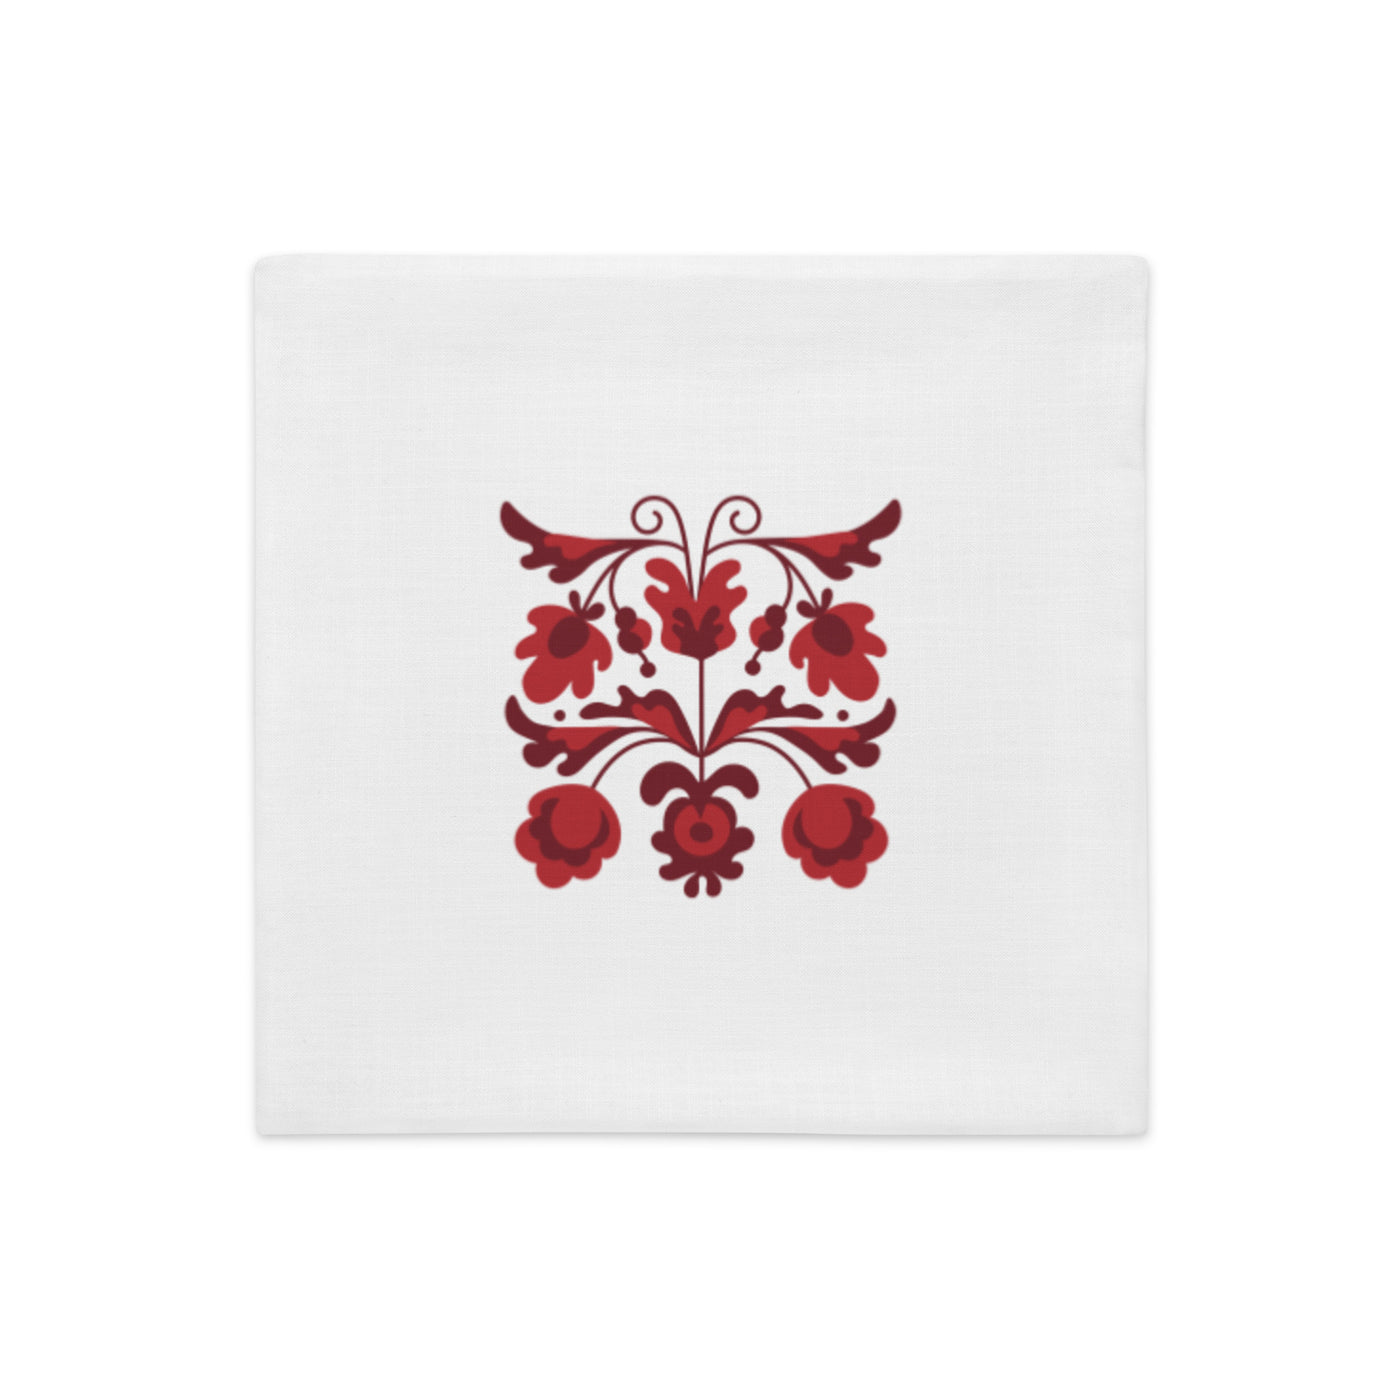 Remembrance Poppies Pillow CASE